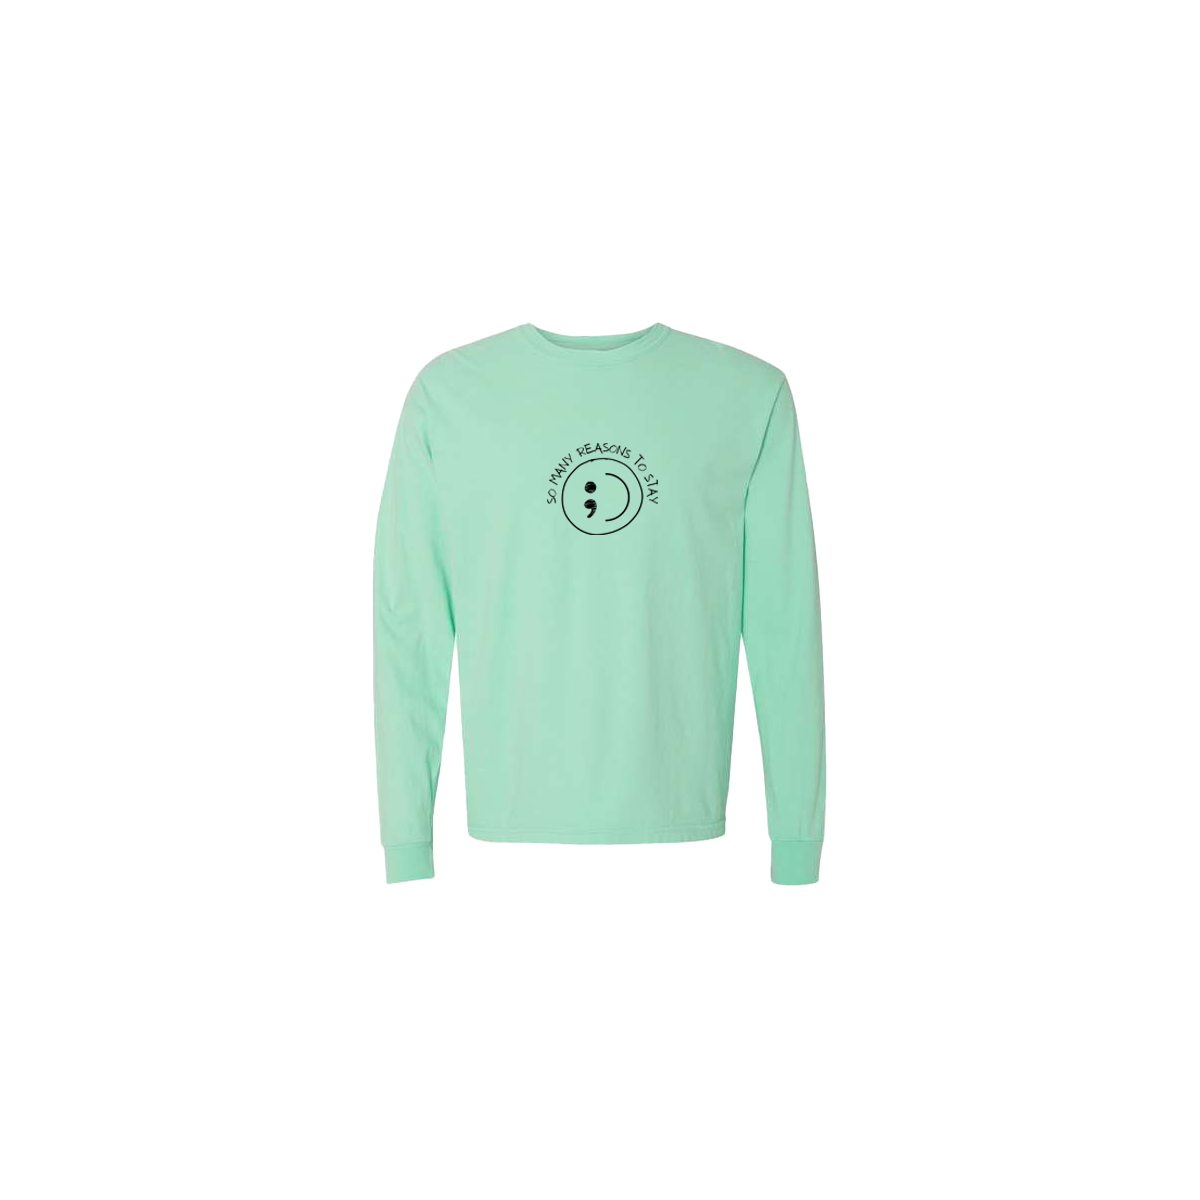 So Many Reasons to Stay Embroidered Mint Long Sleeve Tshirt - Mental Health Awareness Clothing